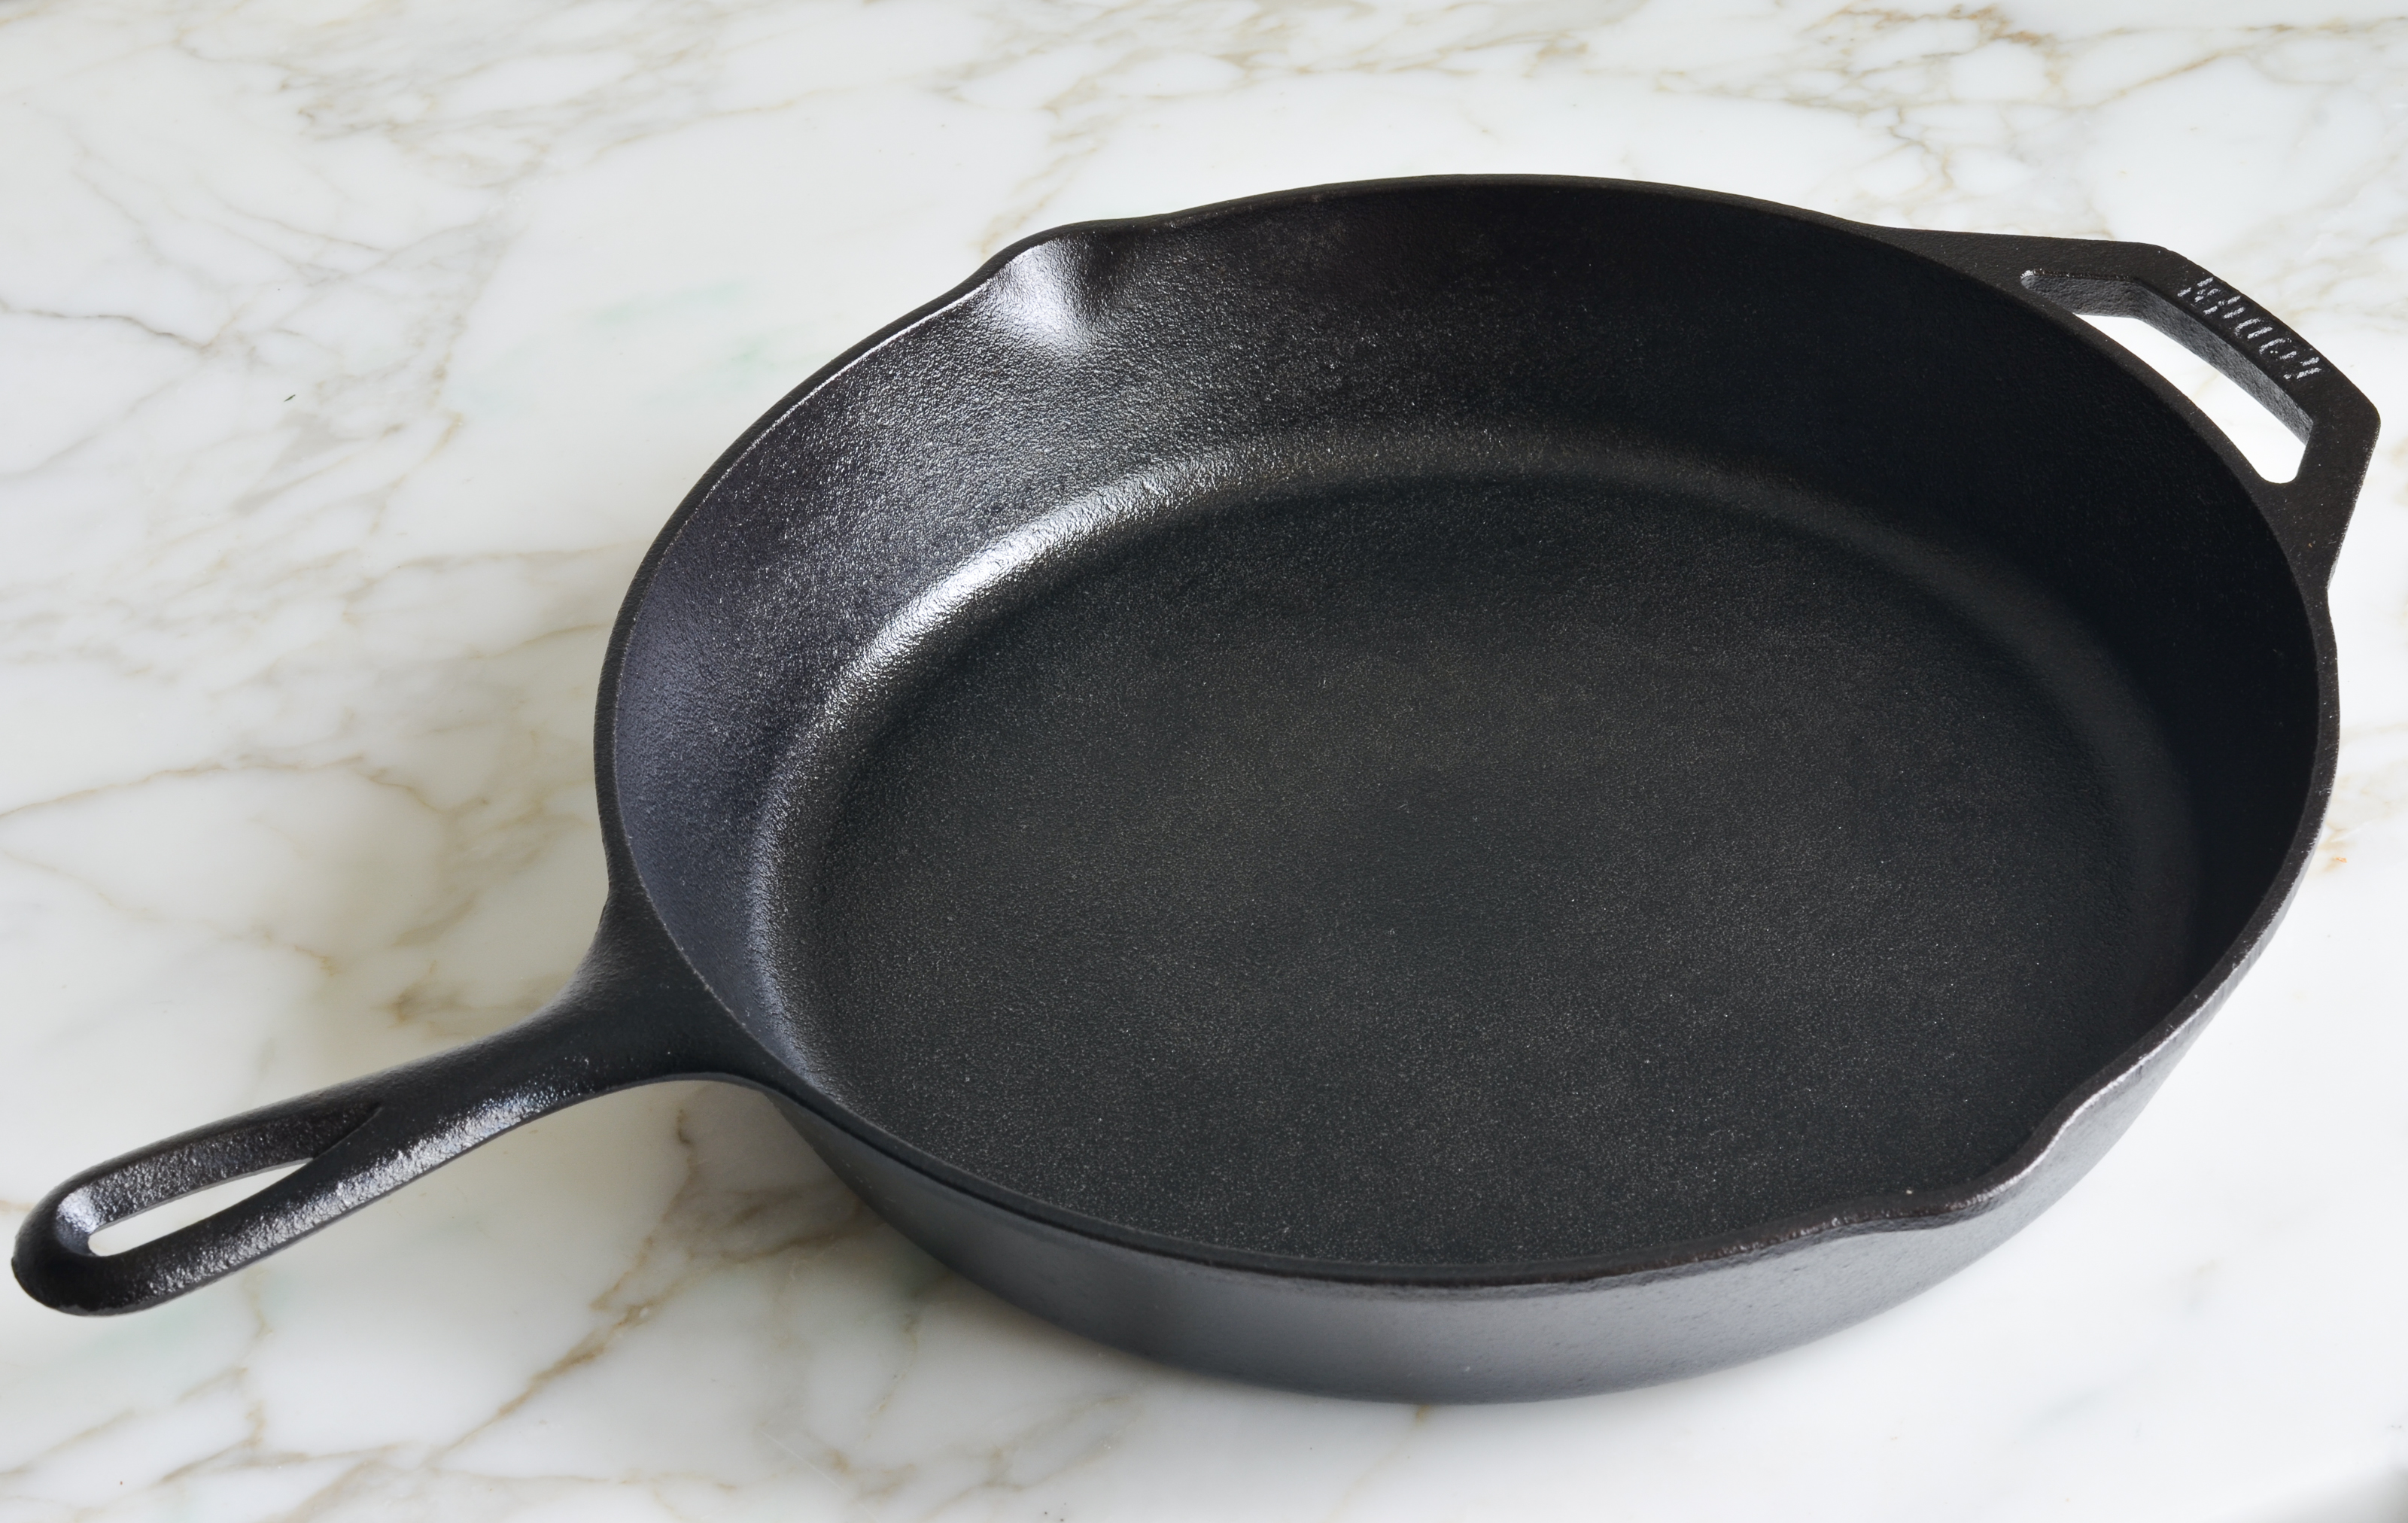 https://www.onceuponachef.com/images/2017/07/how-to-clean-a-cast-iron-pan-1.jpg